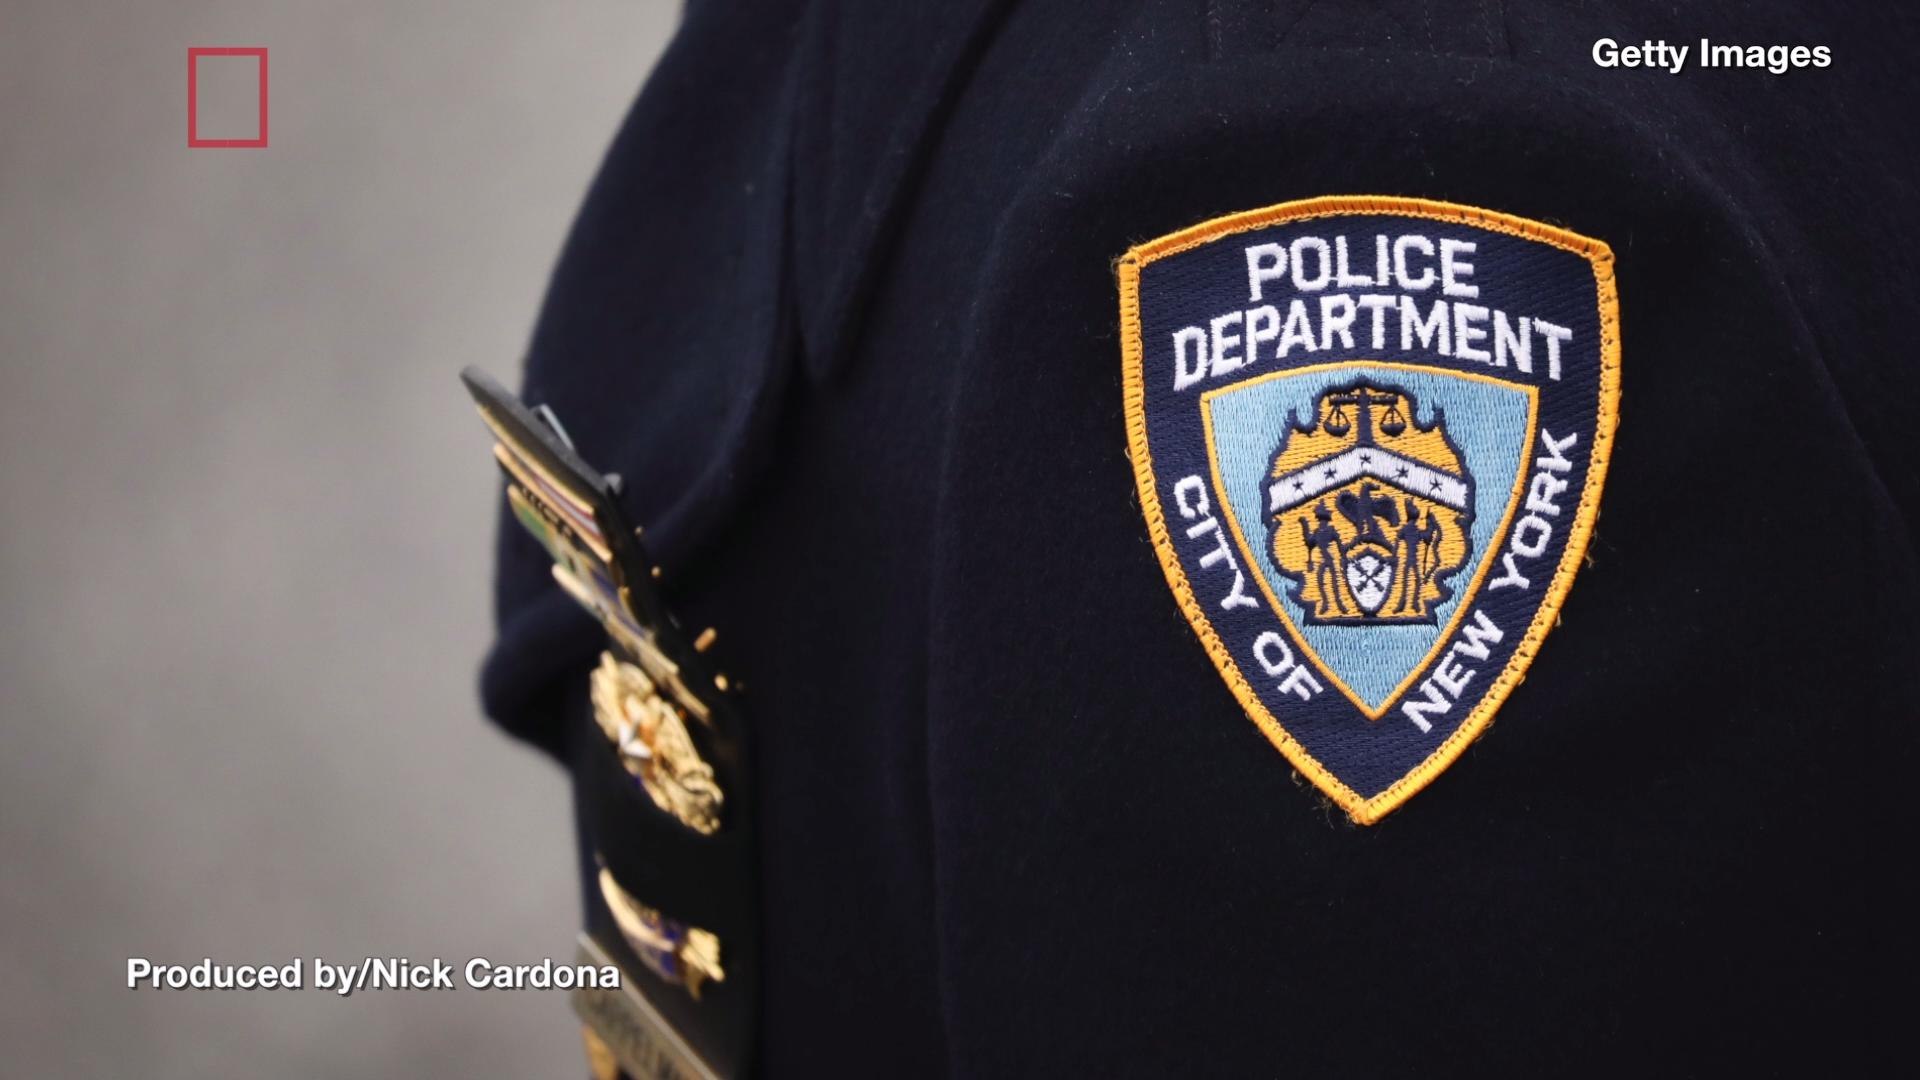 MS-13 Gang Members Looking to Target NYPD Officers While They're Off Duty in Their Homes